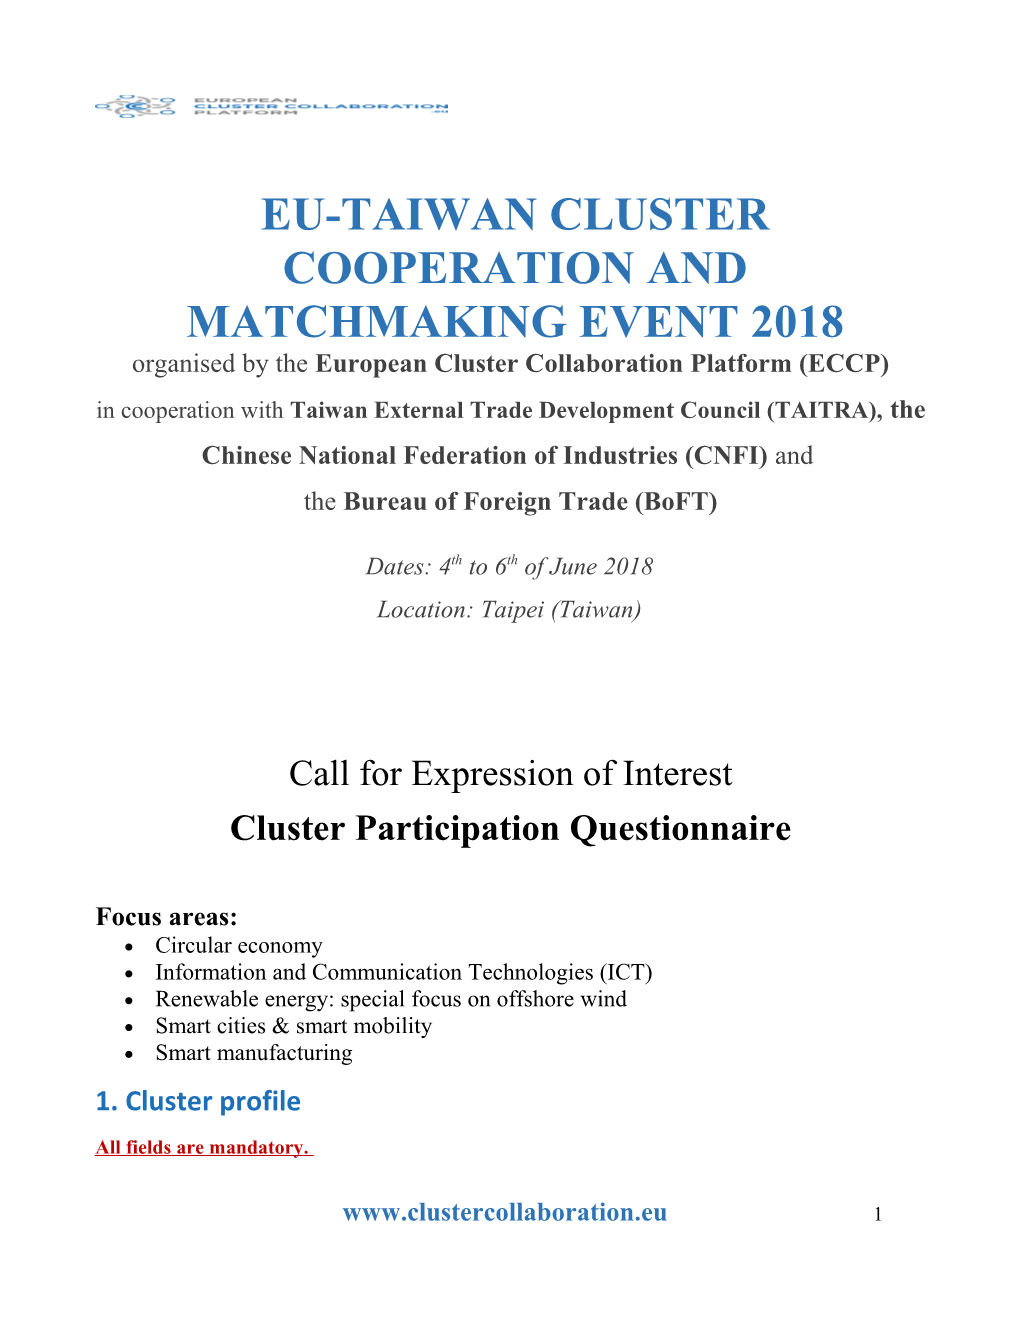 Eu-Taiwan Cluster Cooperation and Matchmaking Event 2018